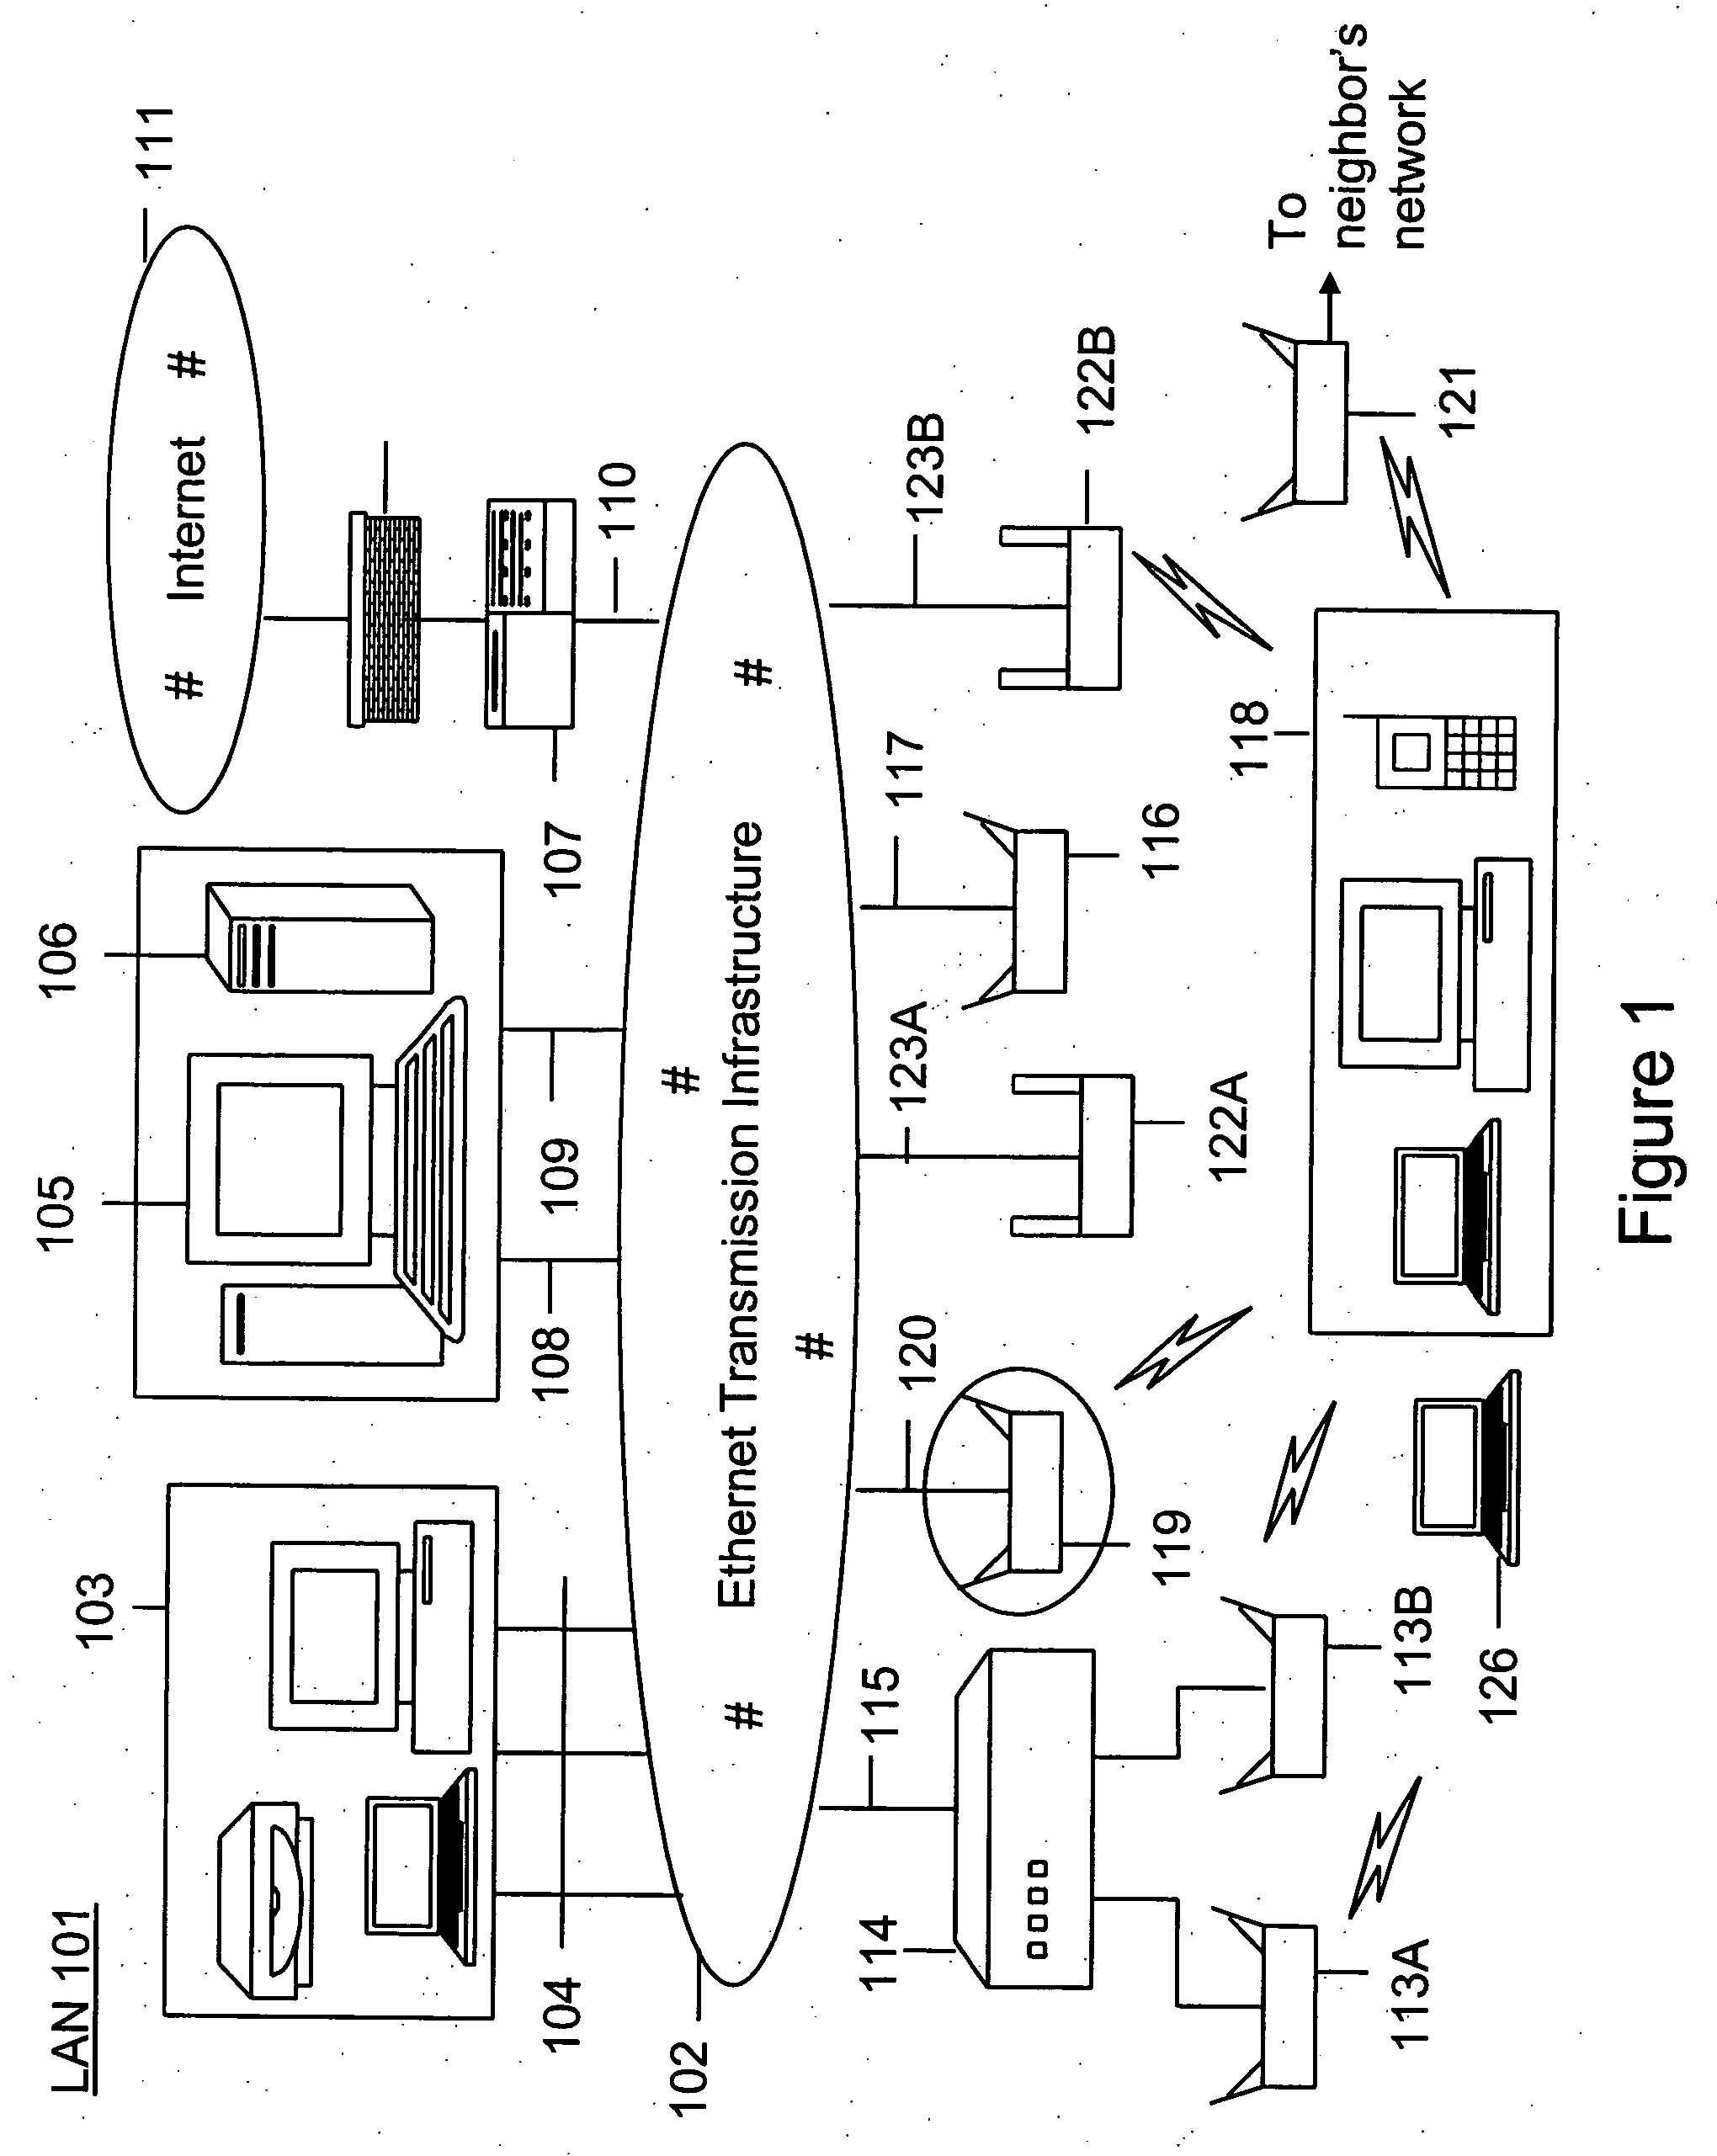 Automated sniffer apparatus and method for wireless local area network security